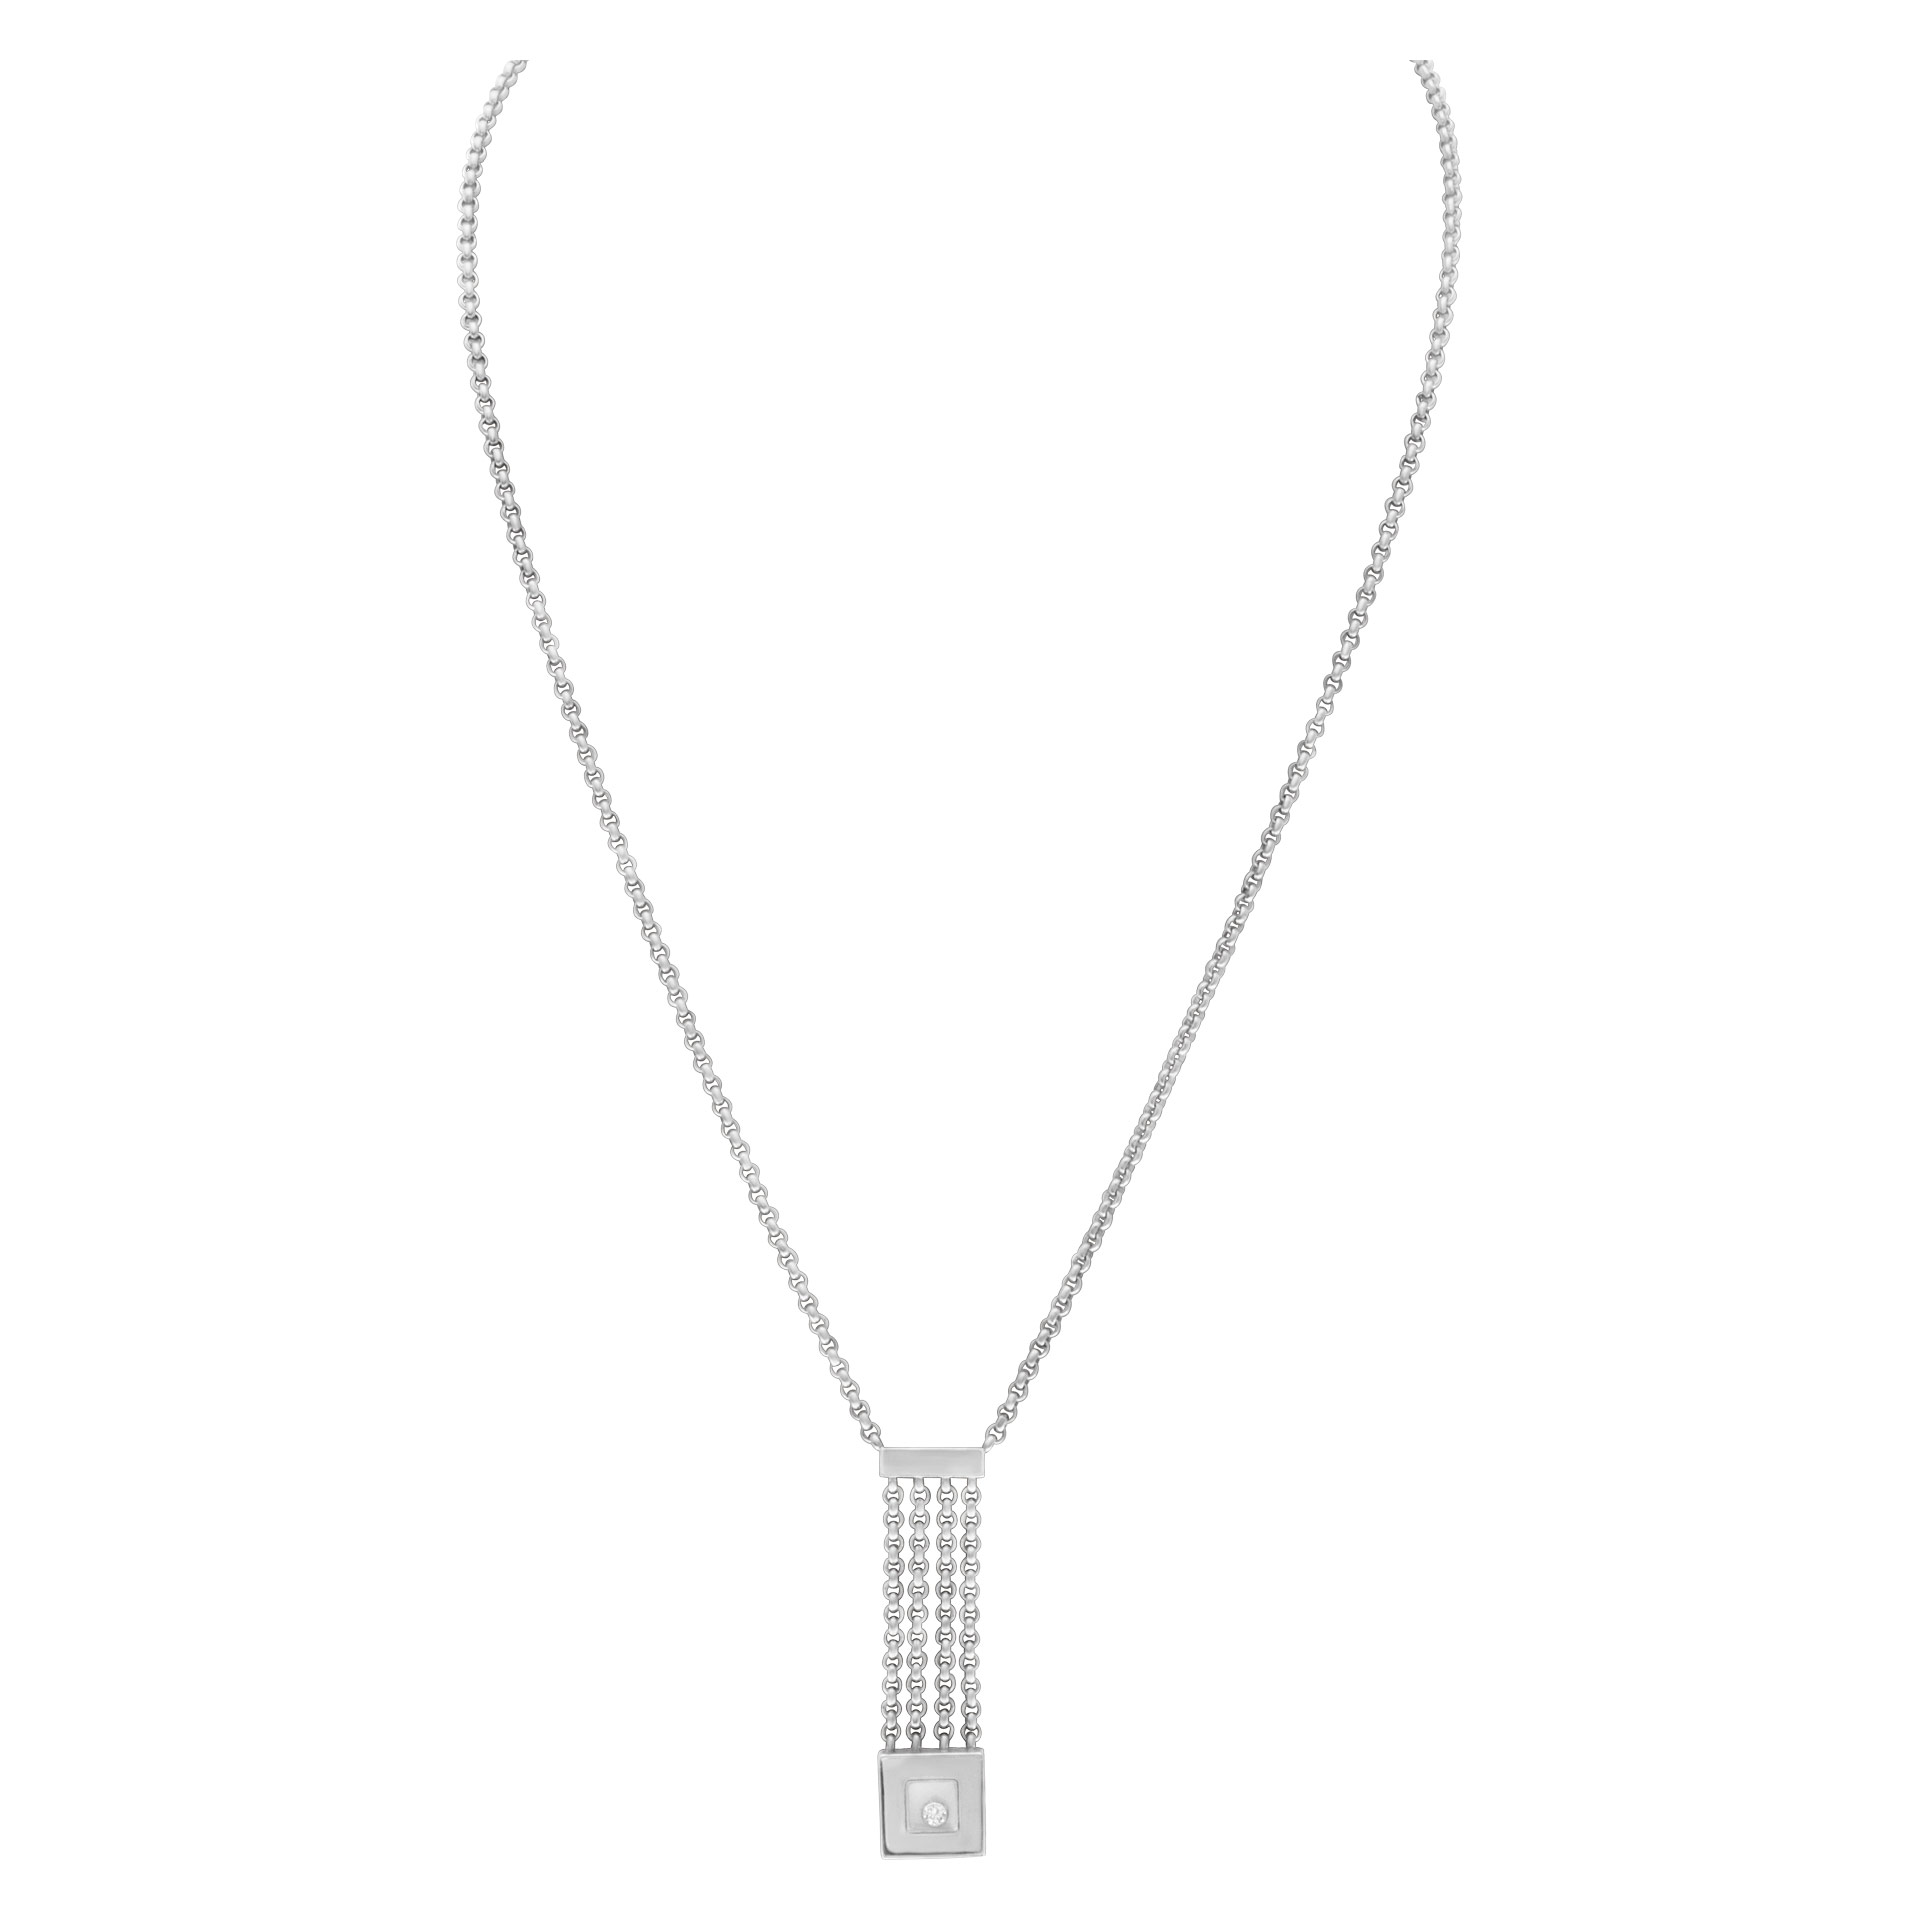 Chopard necklace in 18k white gold